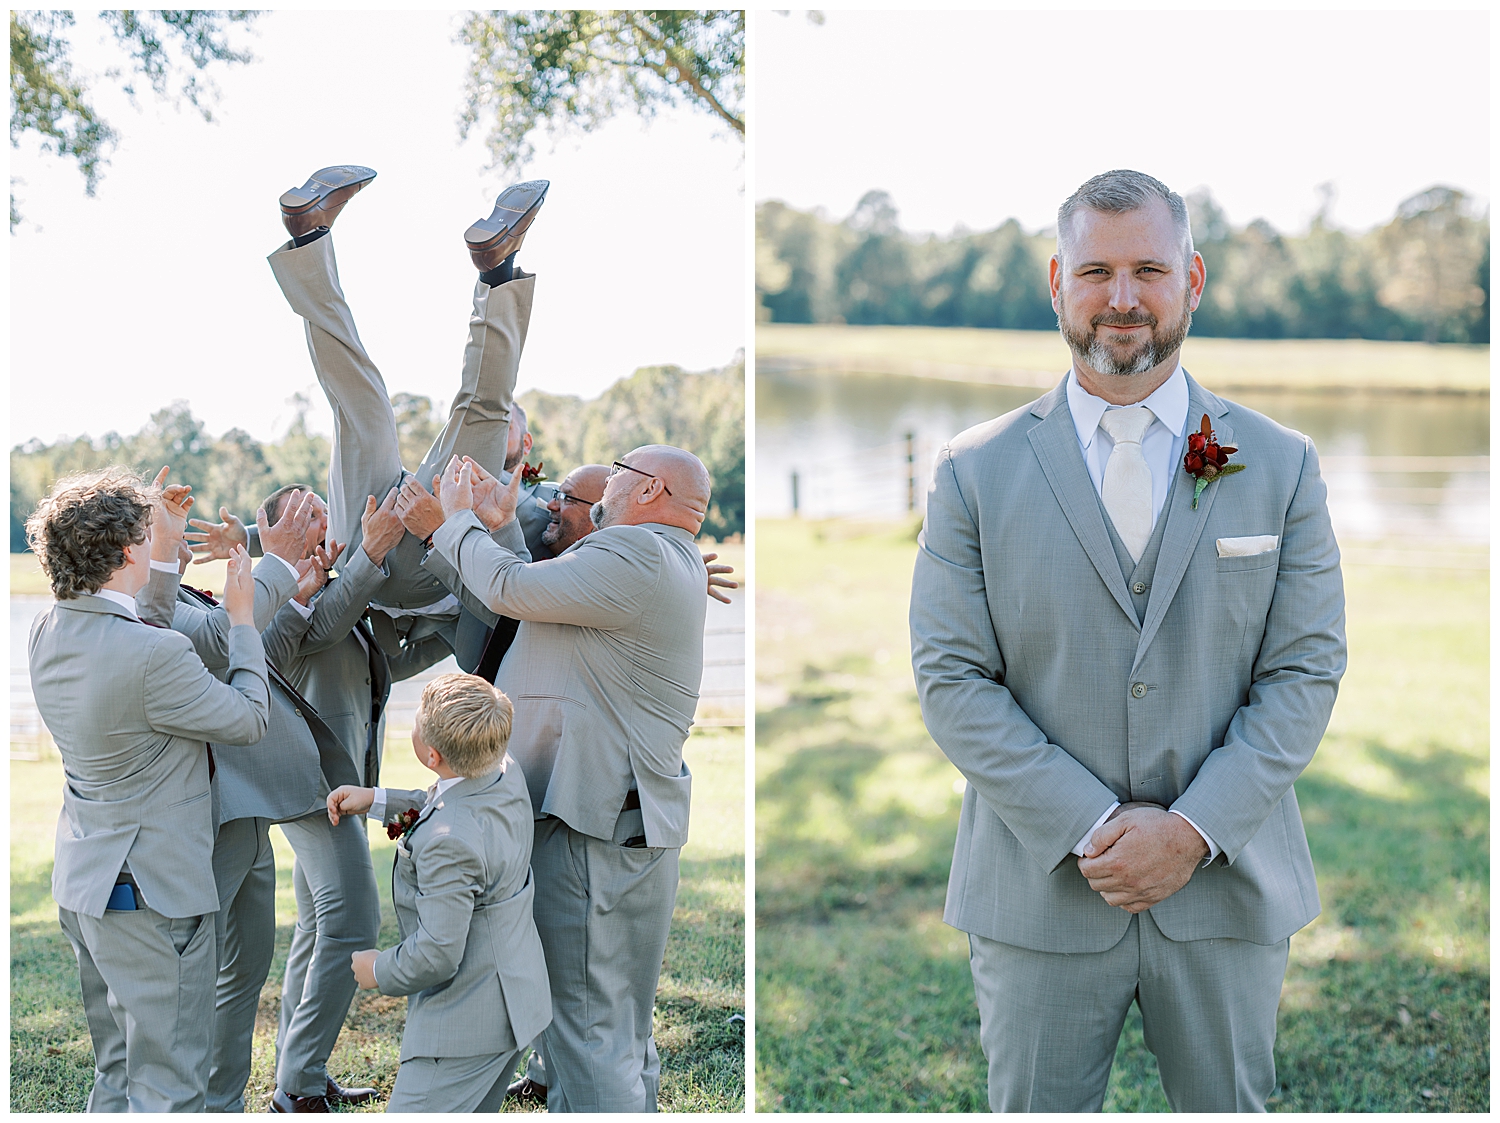 The groomsmen throw the groom into the air.